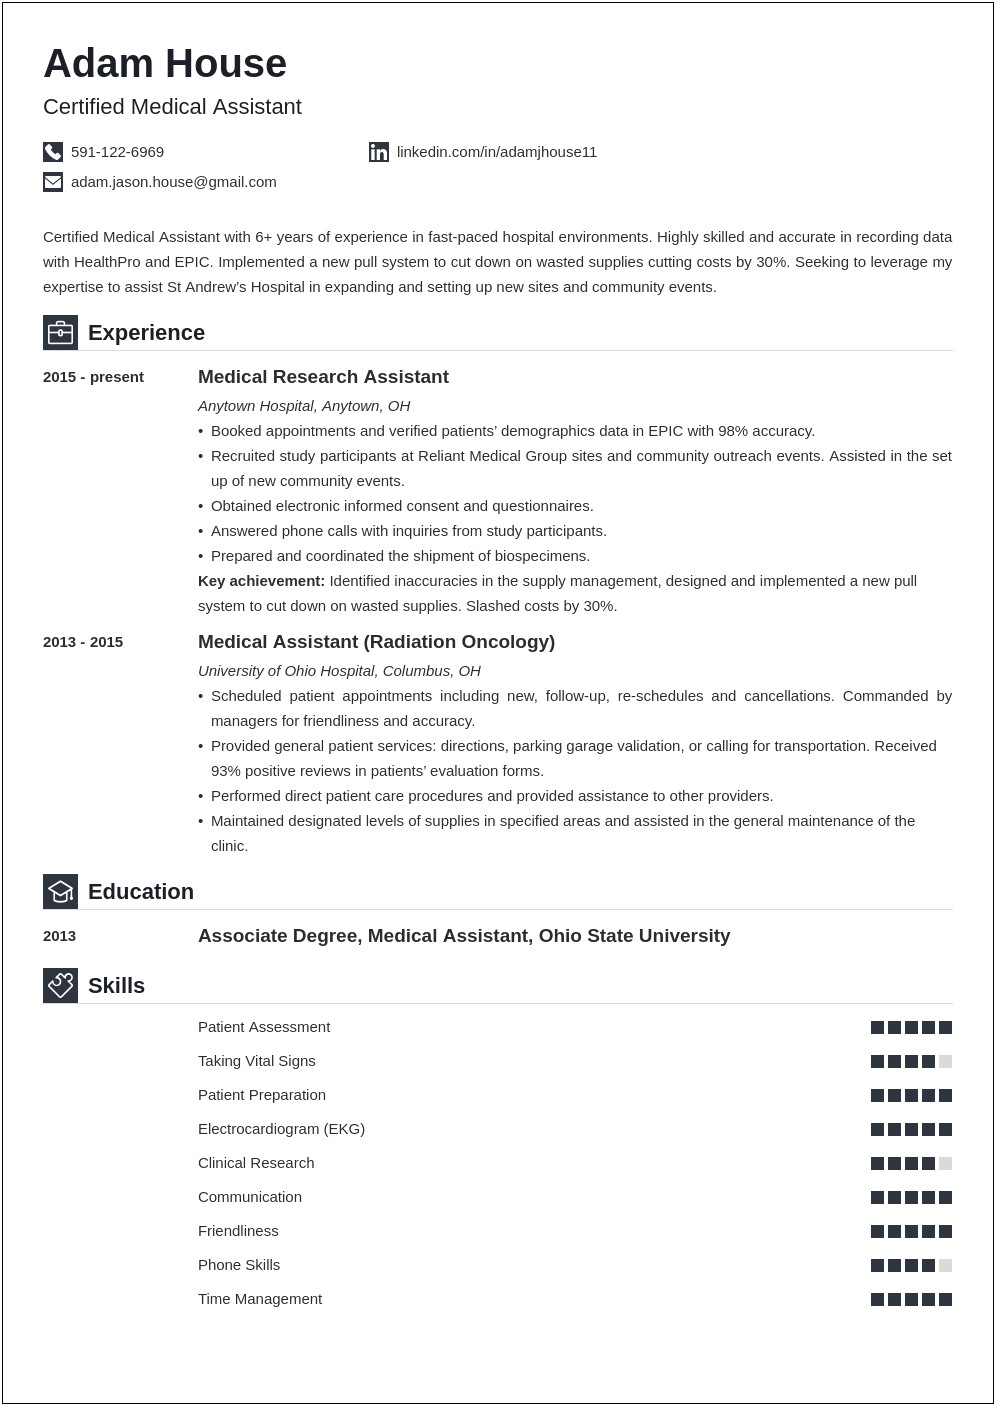 Professional Summary For Medical Assistant Resume